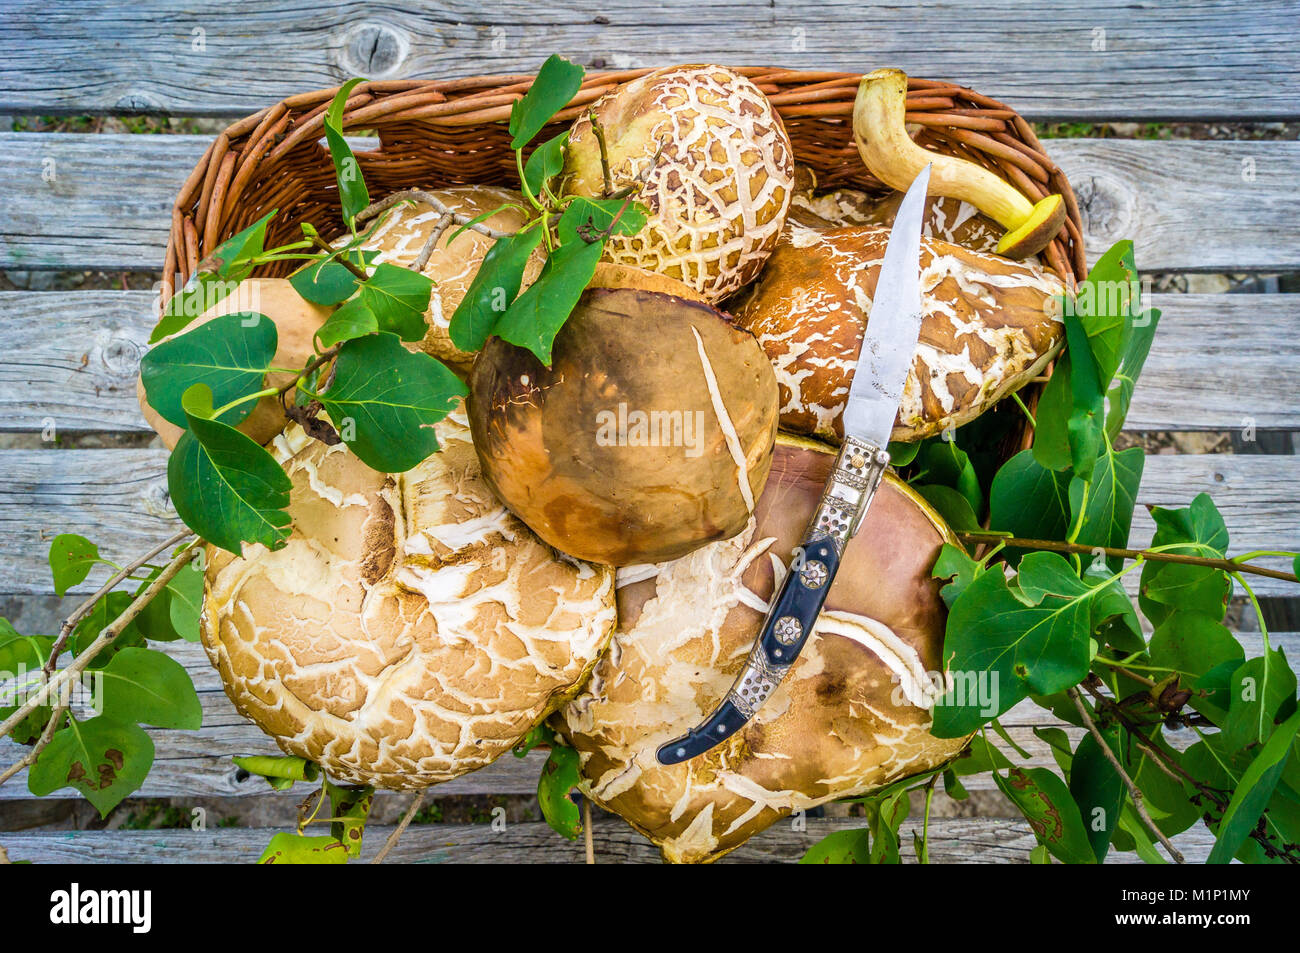 Cep mushrooms basket and a knife after mushroom gathering in France Stock Photo